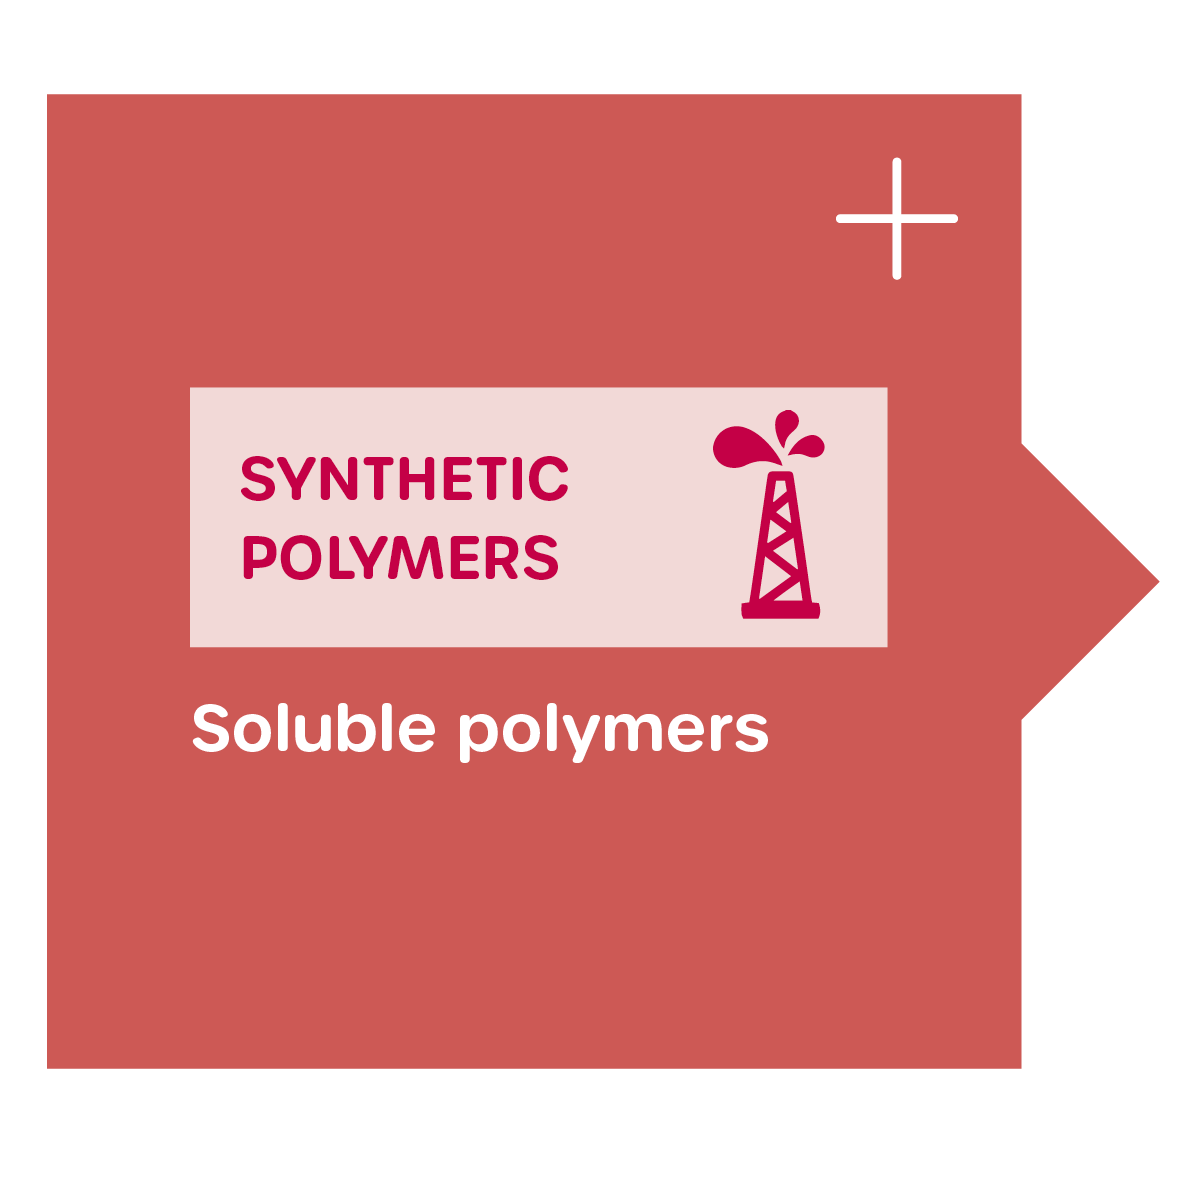 Liquid or soluble polymers